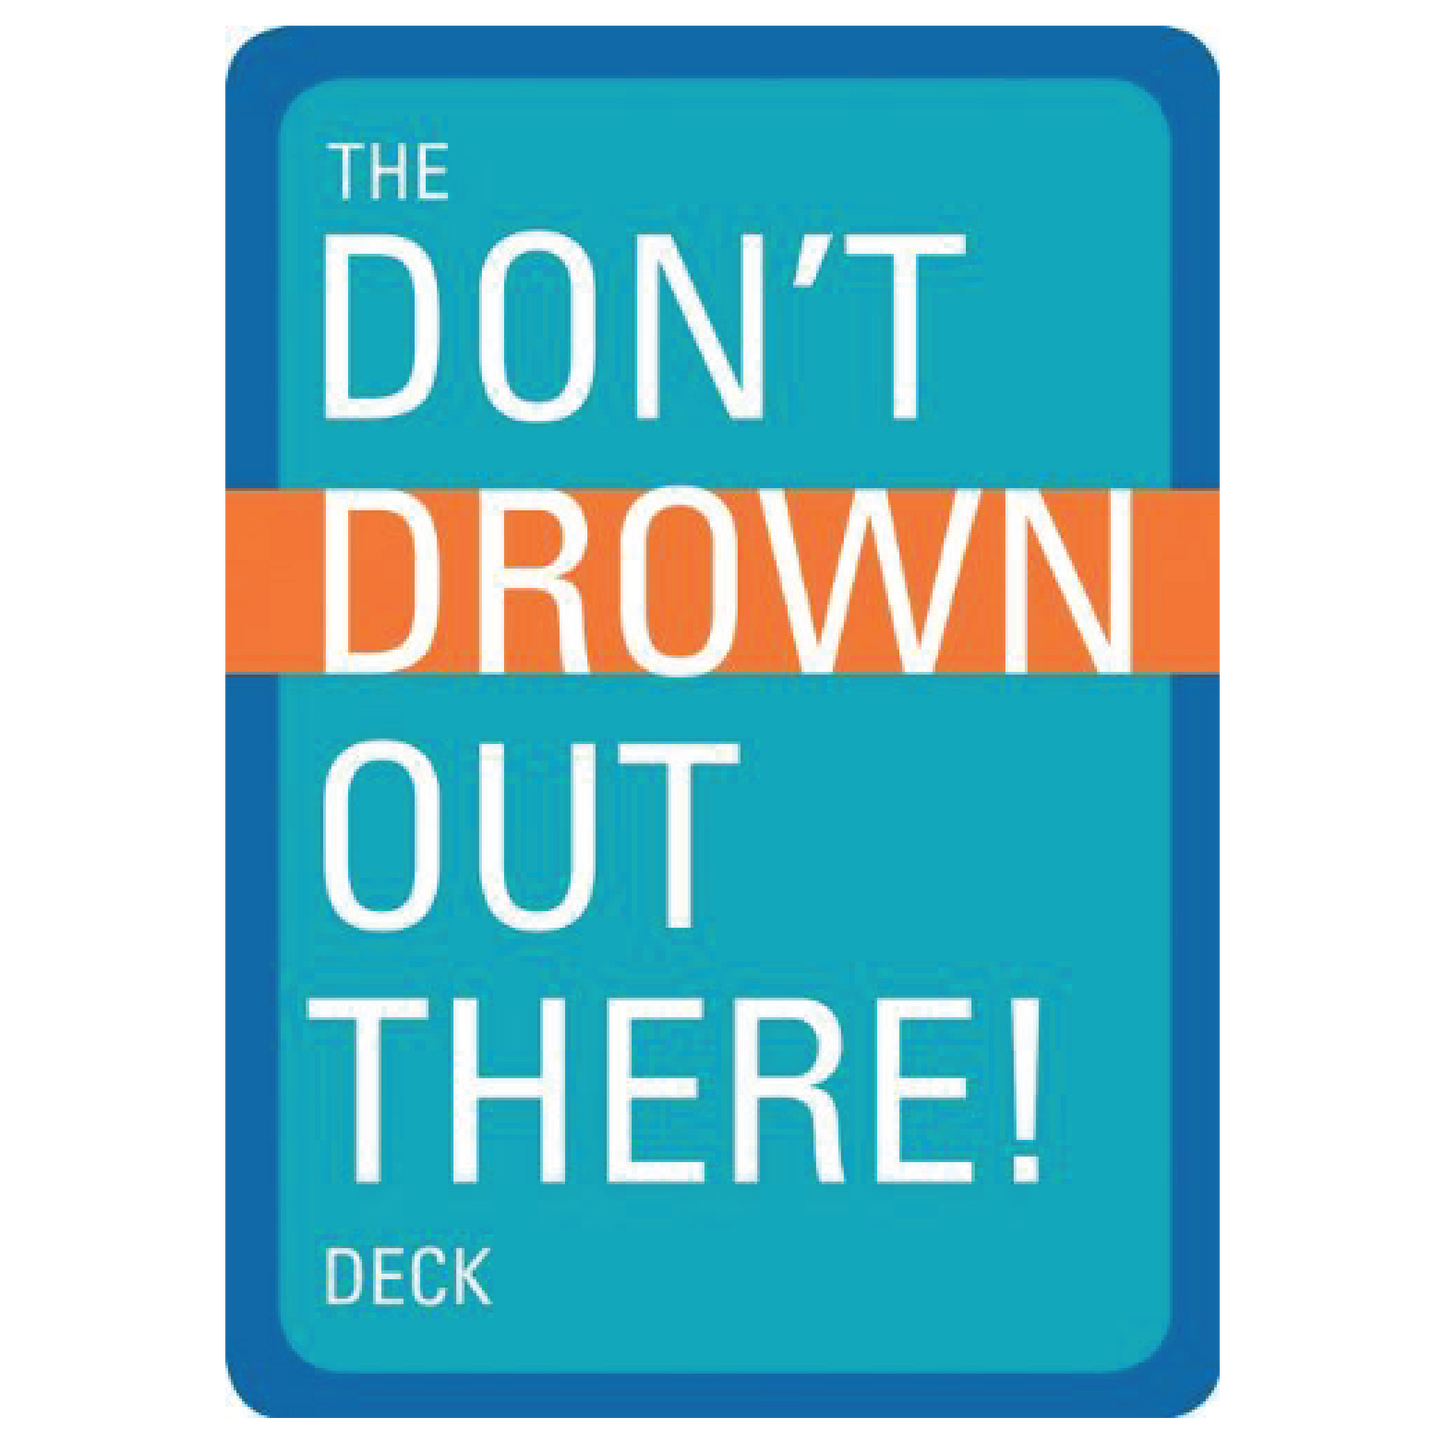 Don't Drown Out There Deck of Cards